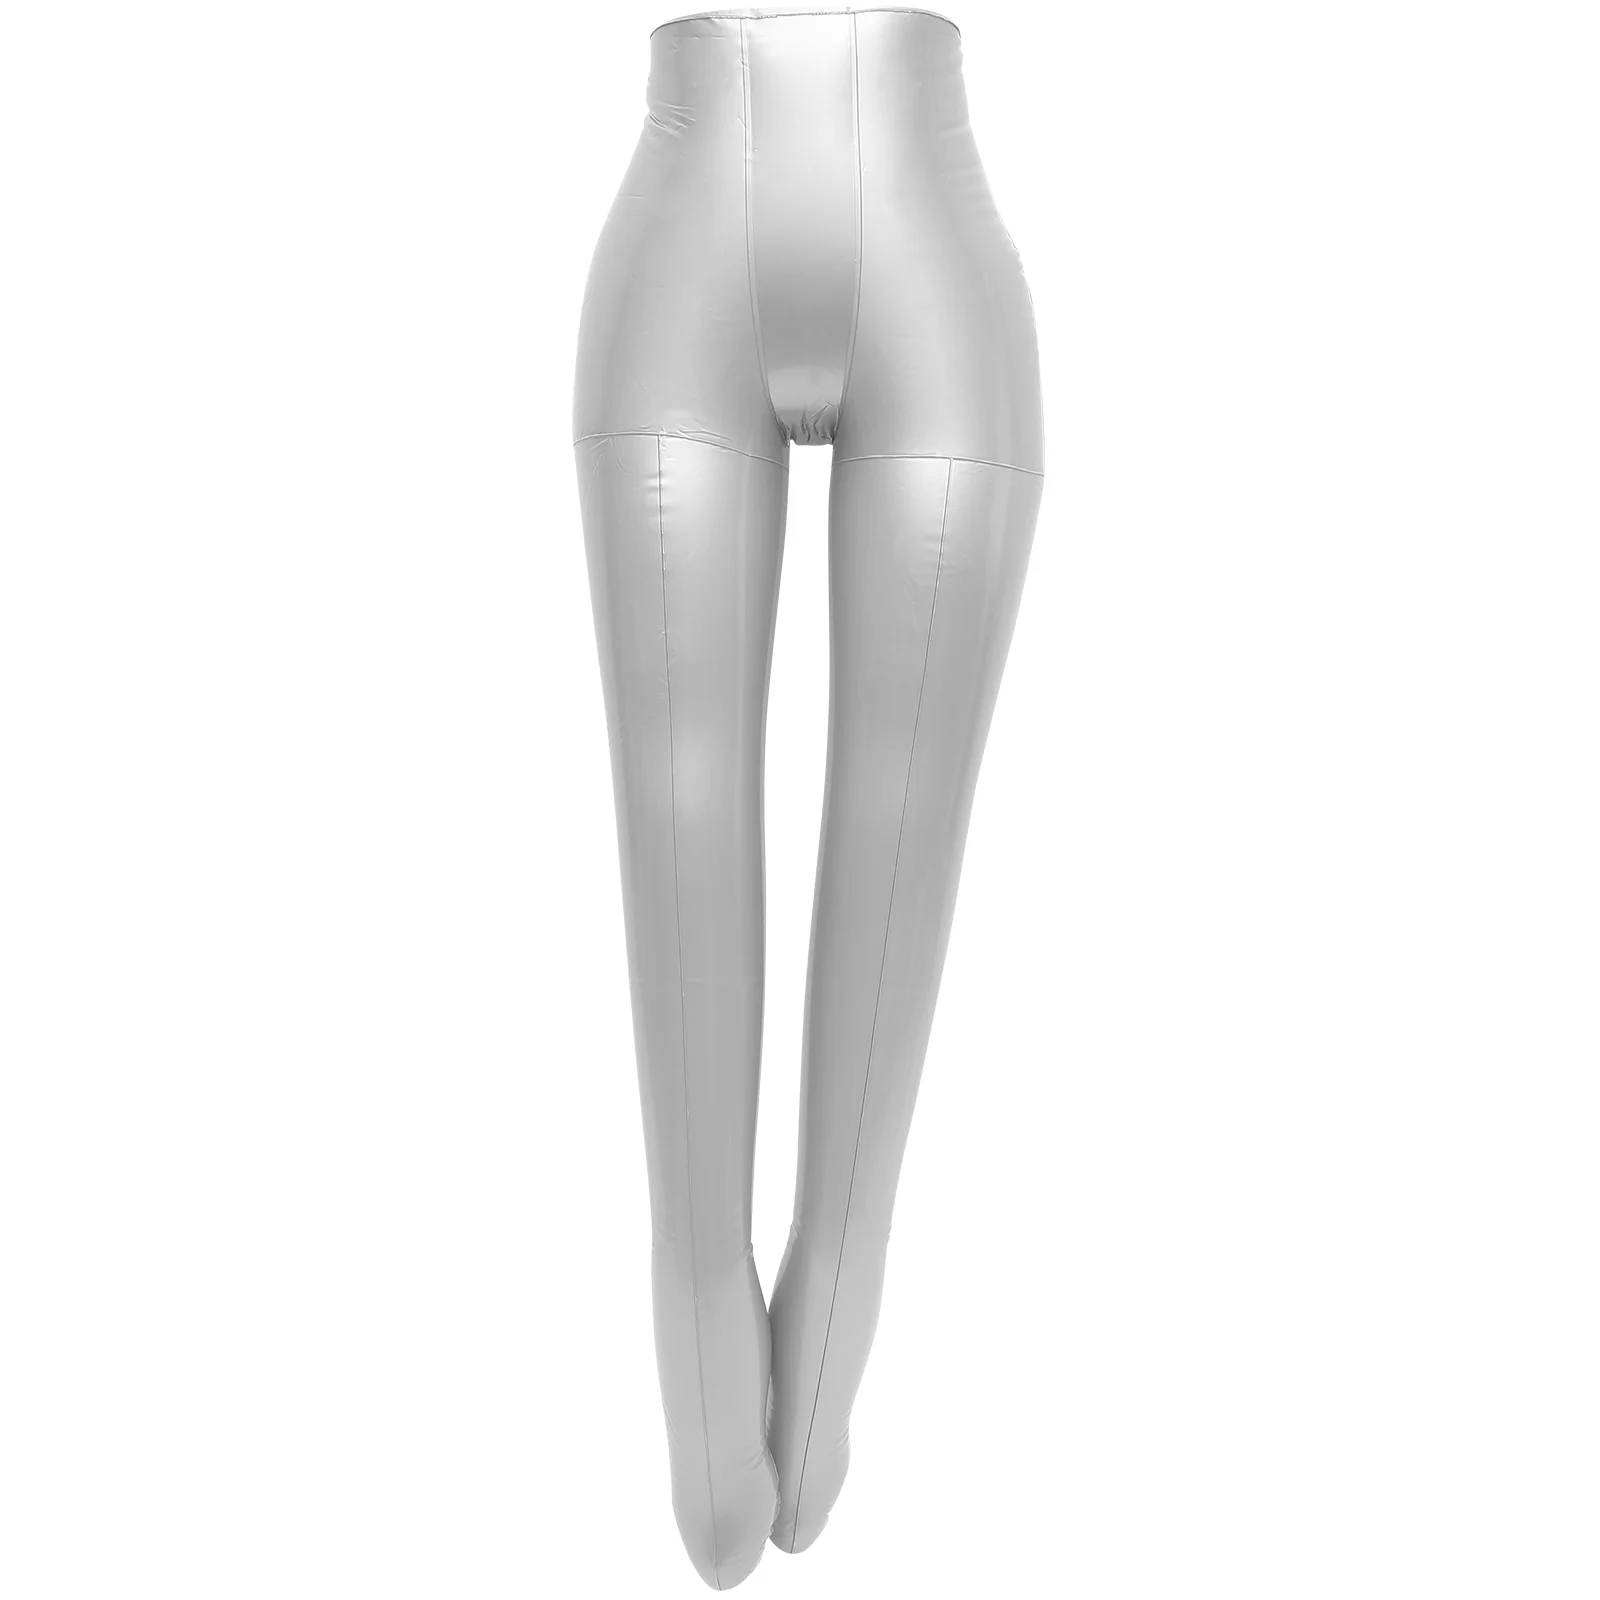 

Inflatable Female Half Body Leg Clothing Display Model Female Pants Trousers Mannequin For Shop Inflatable Mannequin Leg